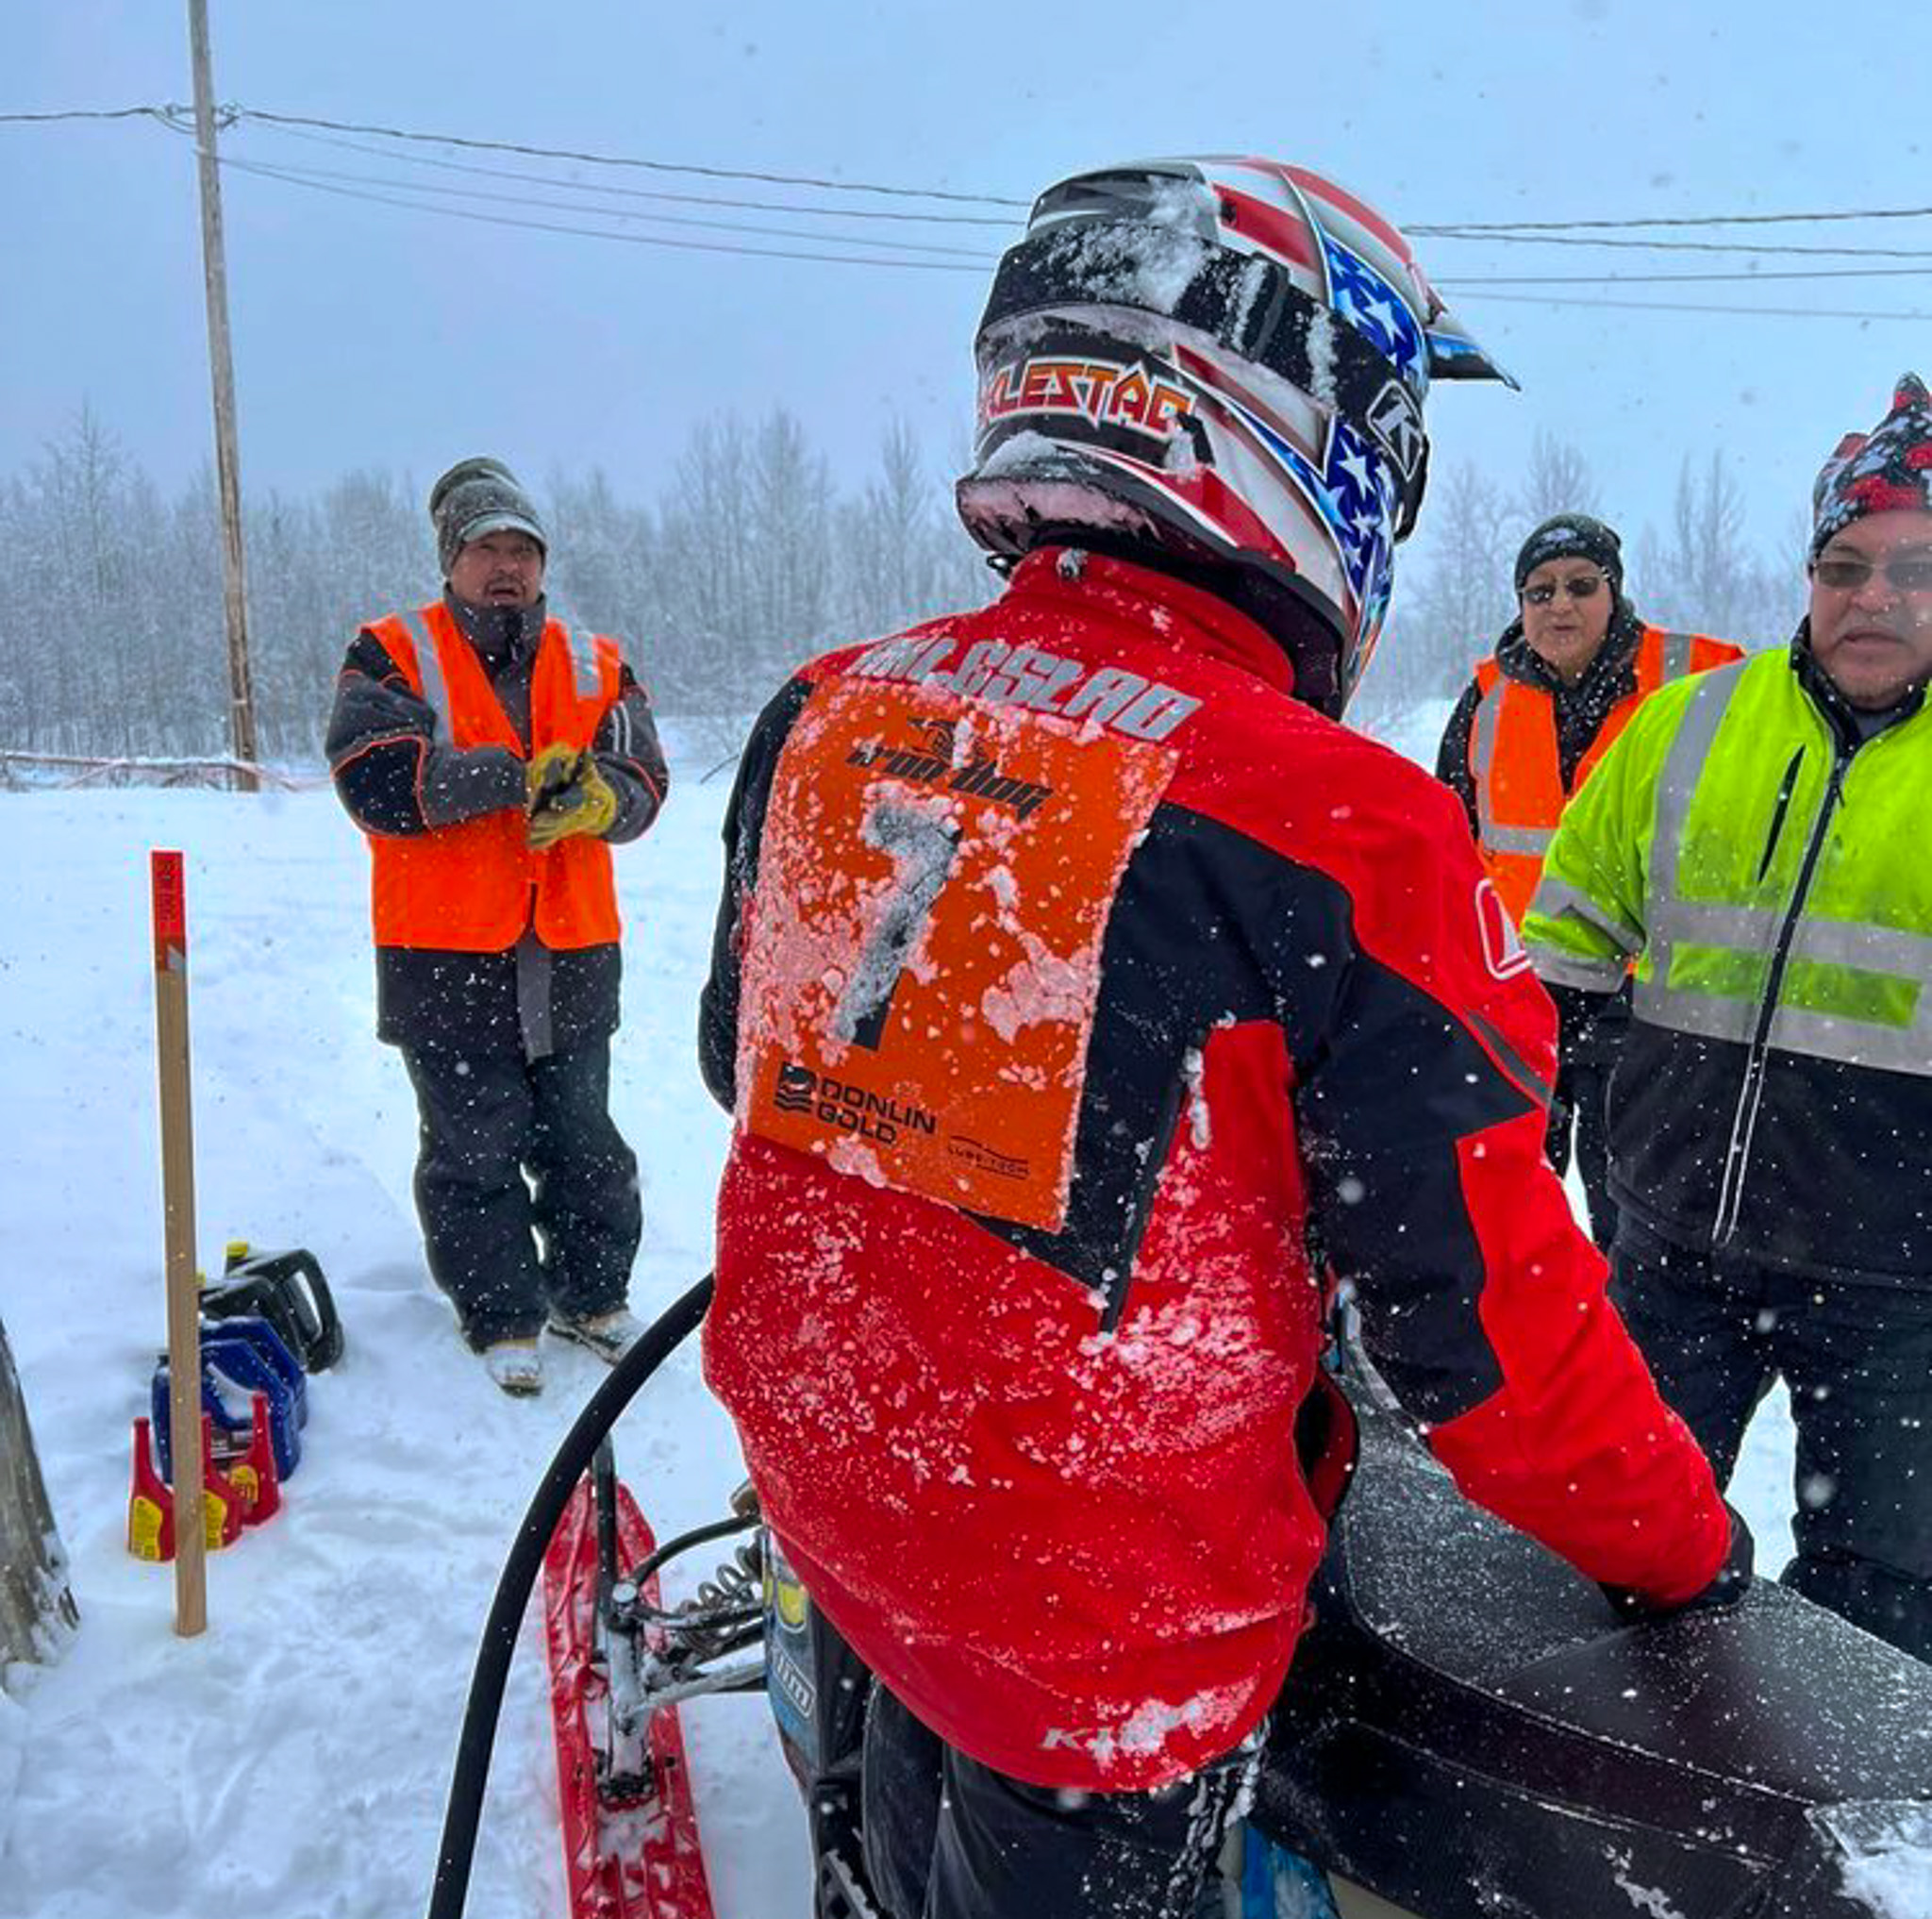 Iron Dog team 7 holds tight lead, snow expected to slow racers towards